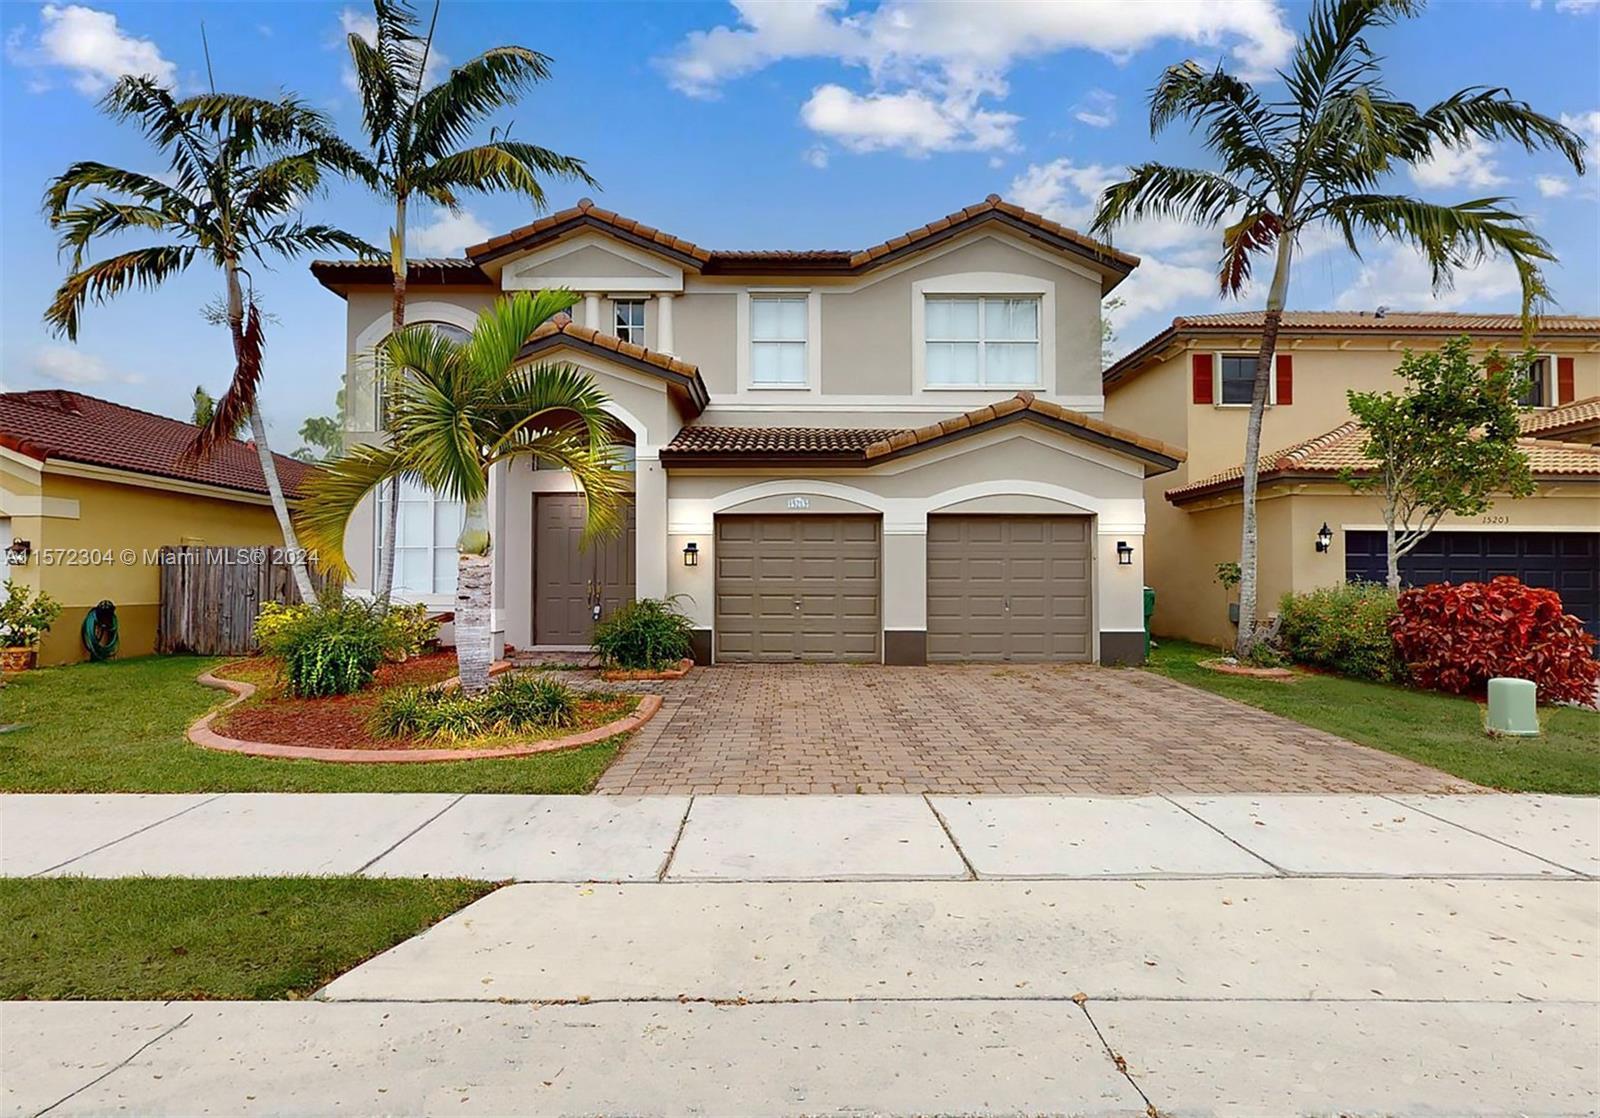 Welcome to your new home! This stunning two-story residence boasts four bedrooms, three bathrooms, a